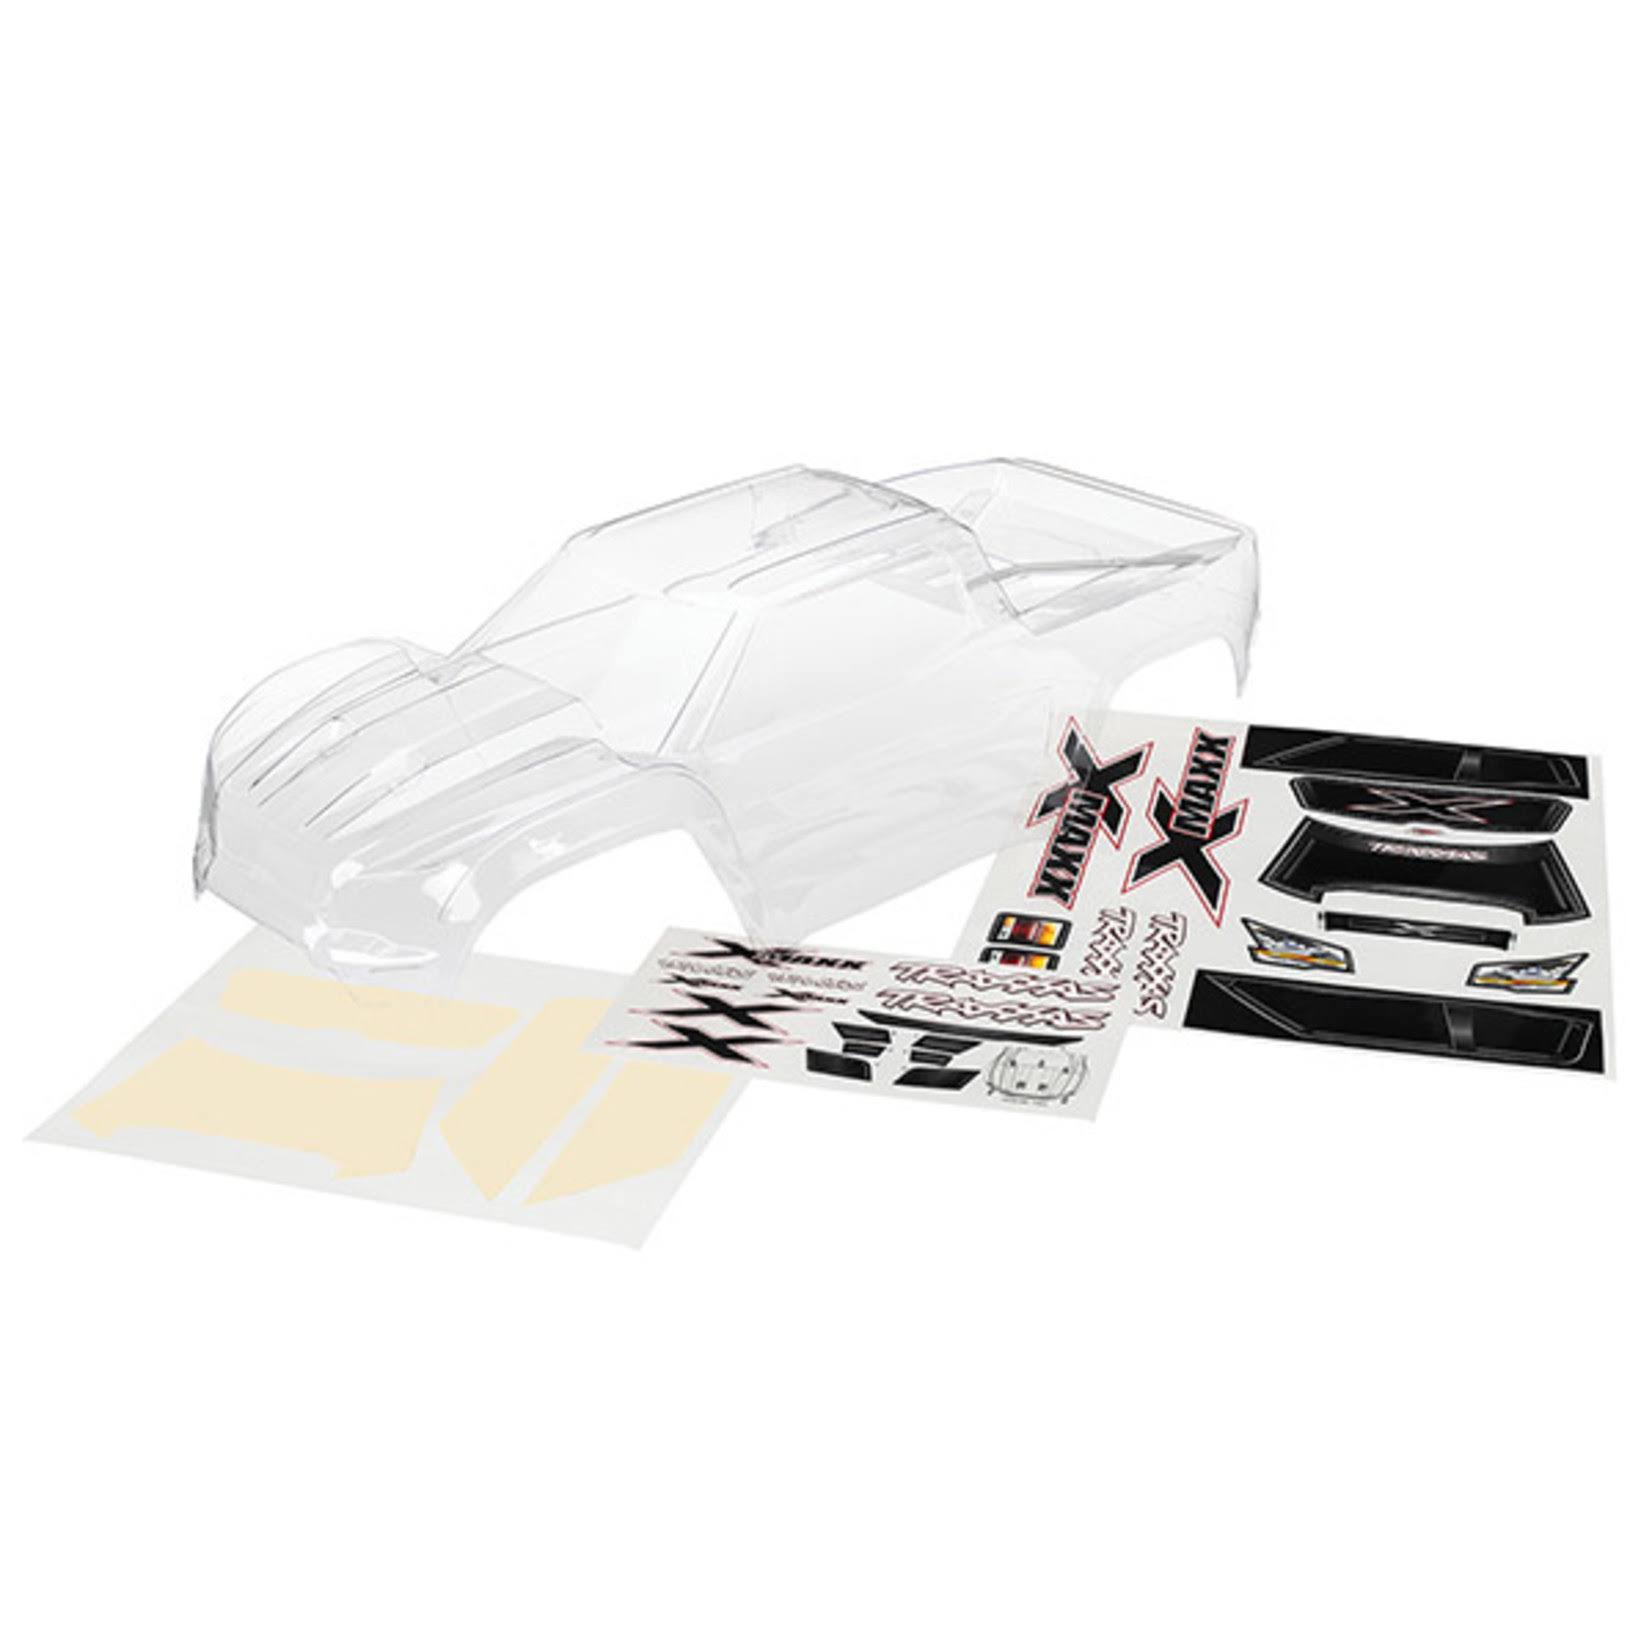 Traxxas 7711 RC Vehicle Clear X Maxx Body - with Decal Sheet